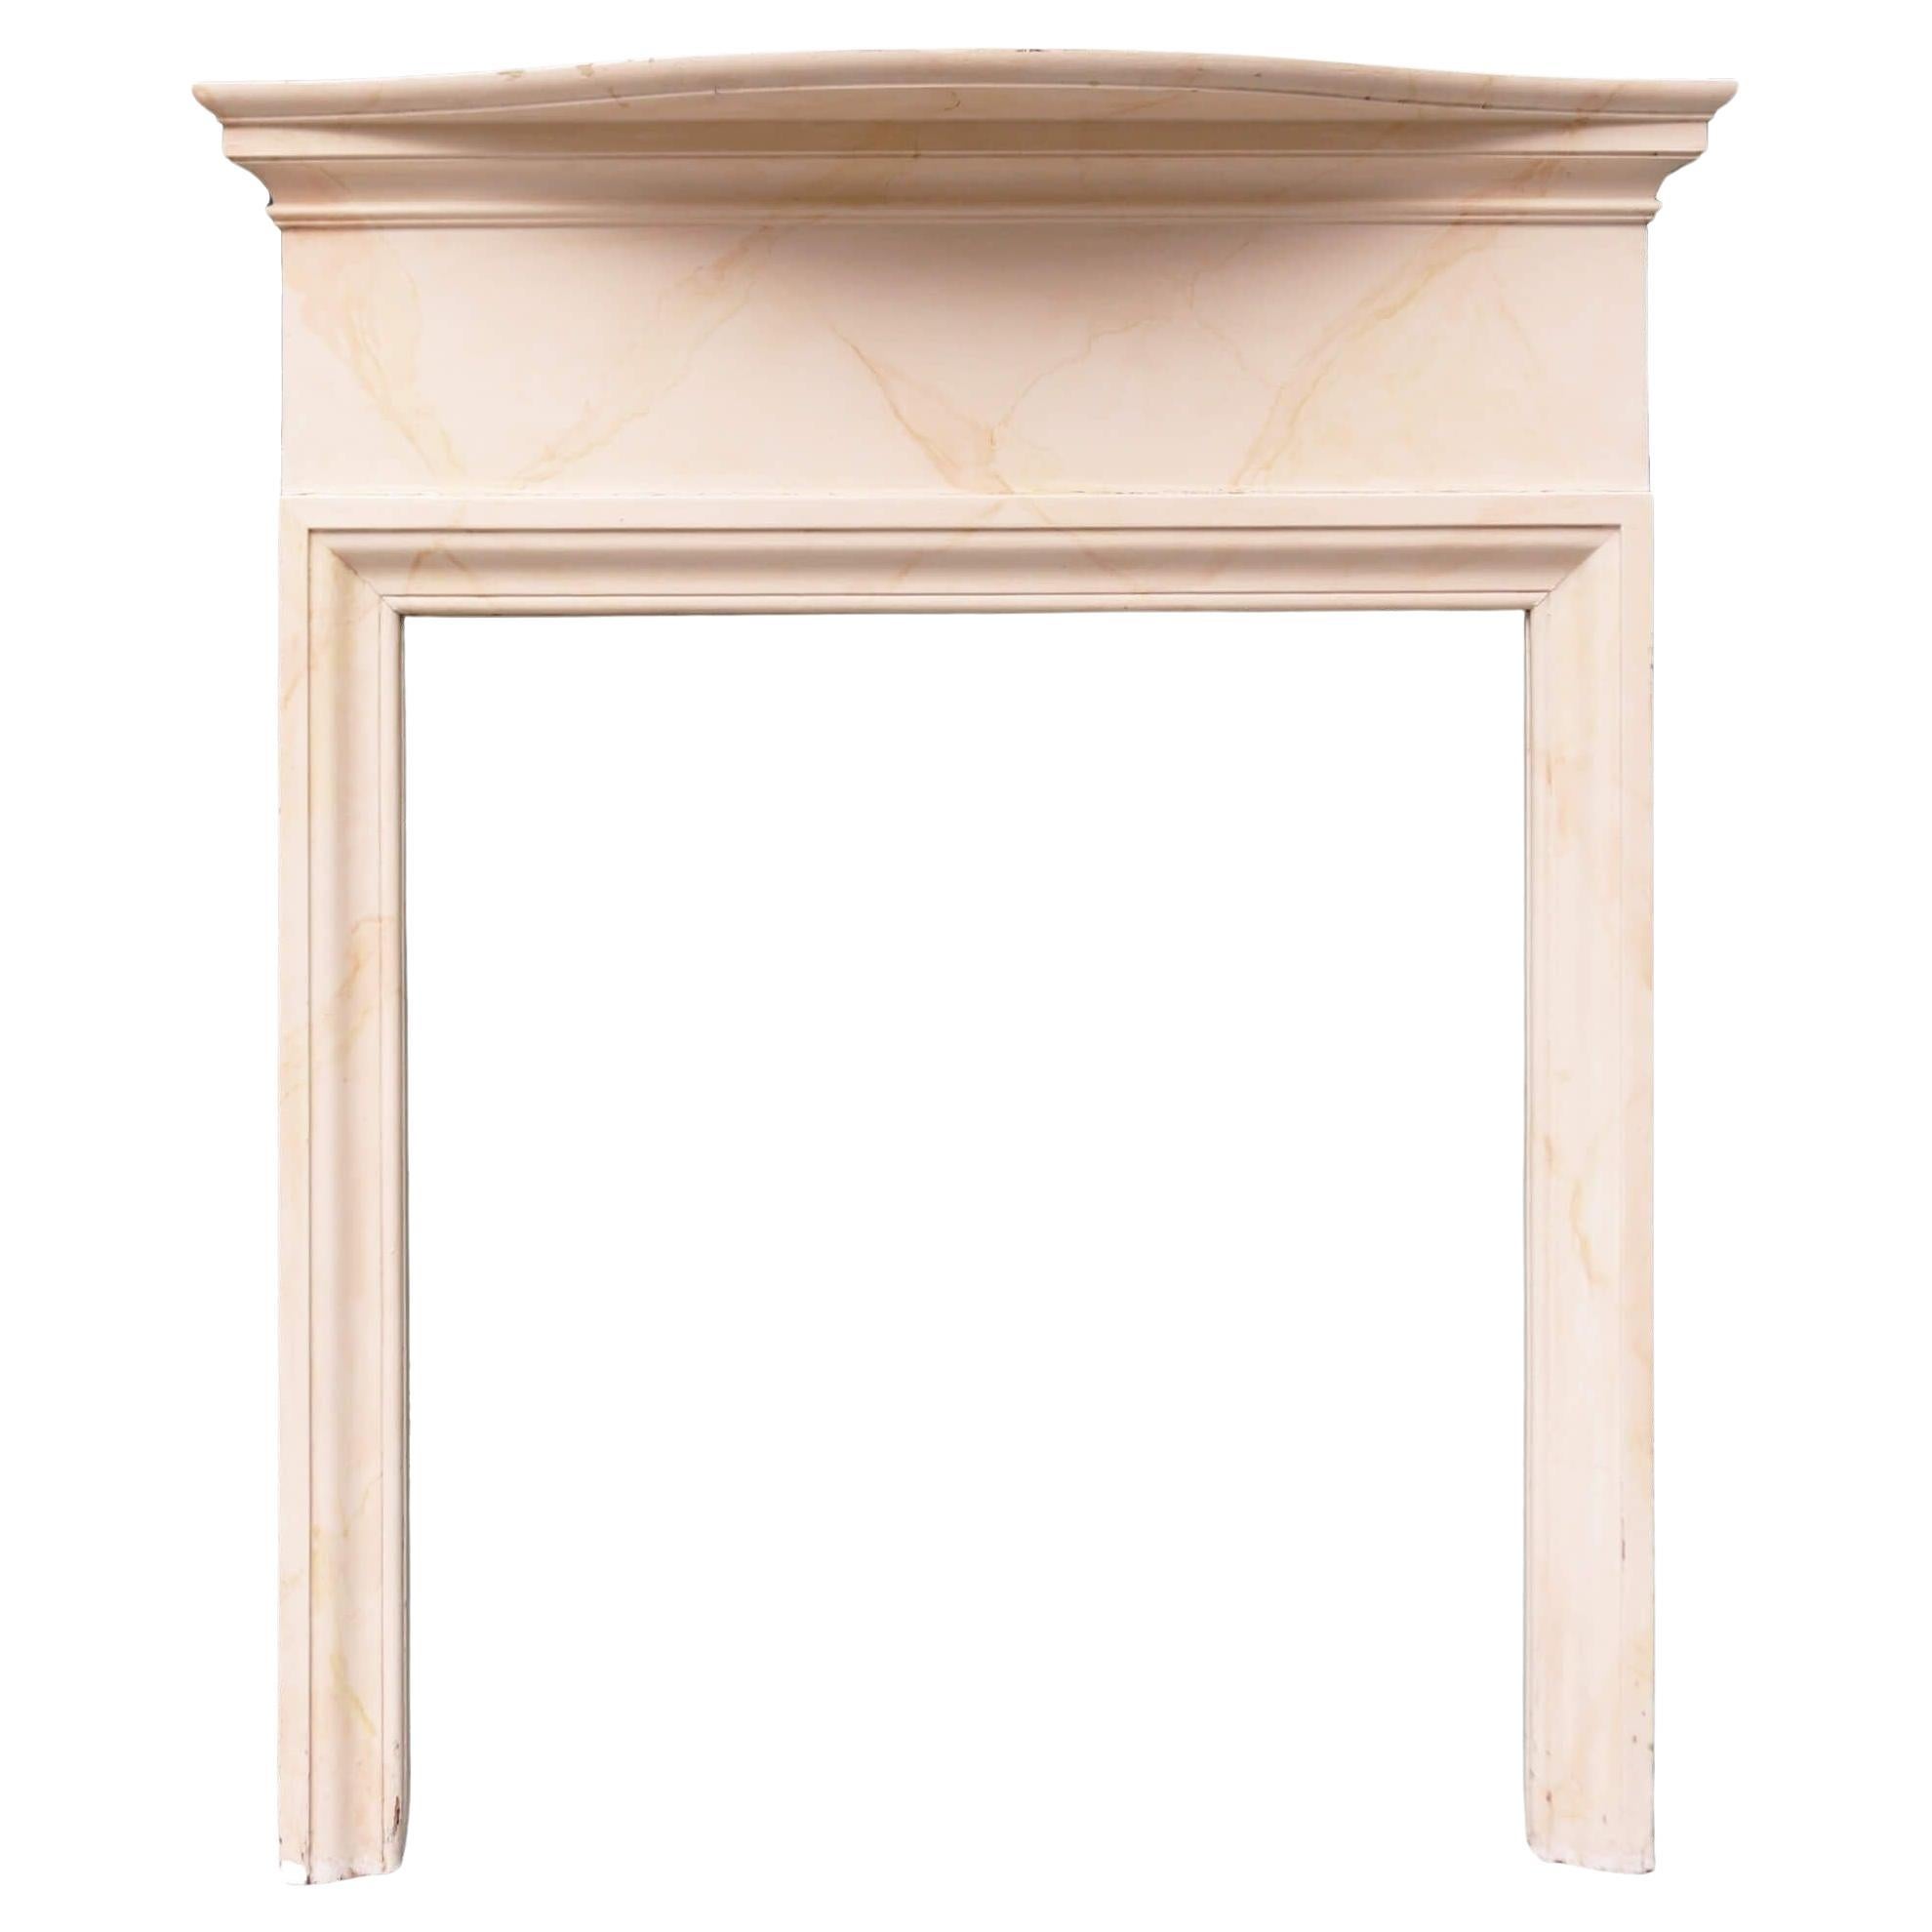 19th Century Simulated Marble Painted Fire Mantel